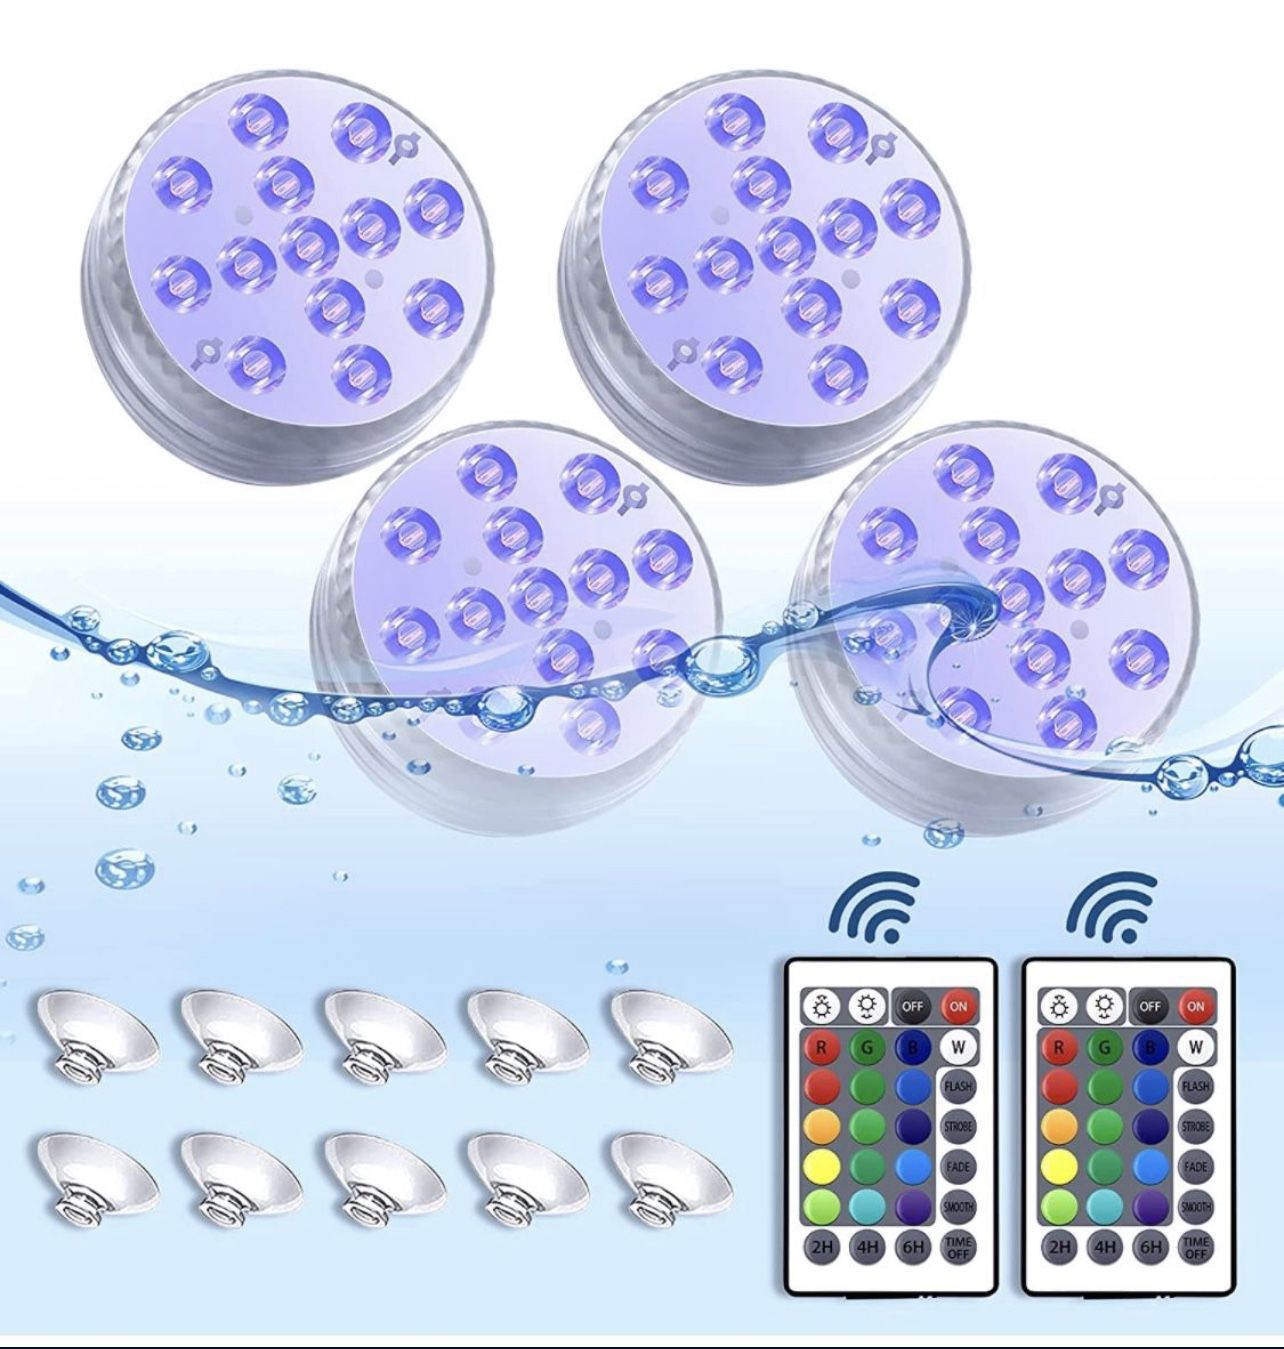 Submersible LED Lights & Pool Lights with RF Remote, Bathtub Light,Waterproof 16 Colors Changing  Underwater with Magnets, Shower Lights for Hot Tub, 